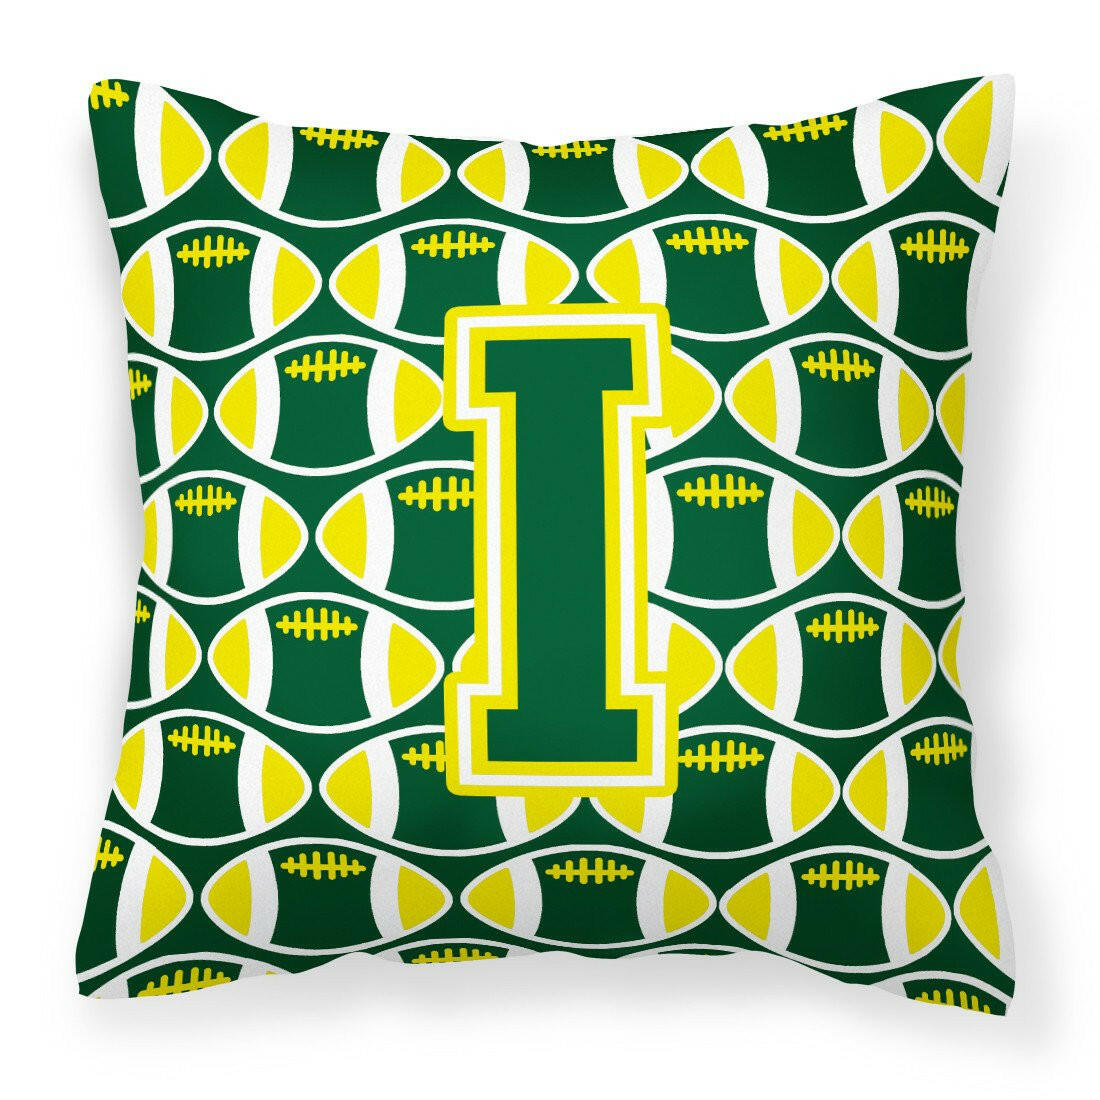 Letter I Football Green and Yellow Fabric Decorative Pillow CJ1075-IPW1414 by Caroline's Treasures